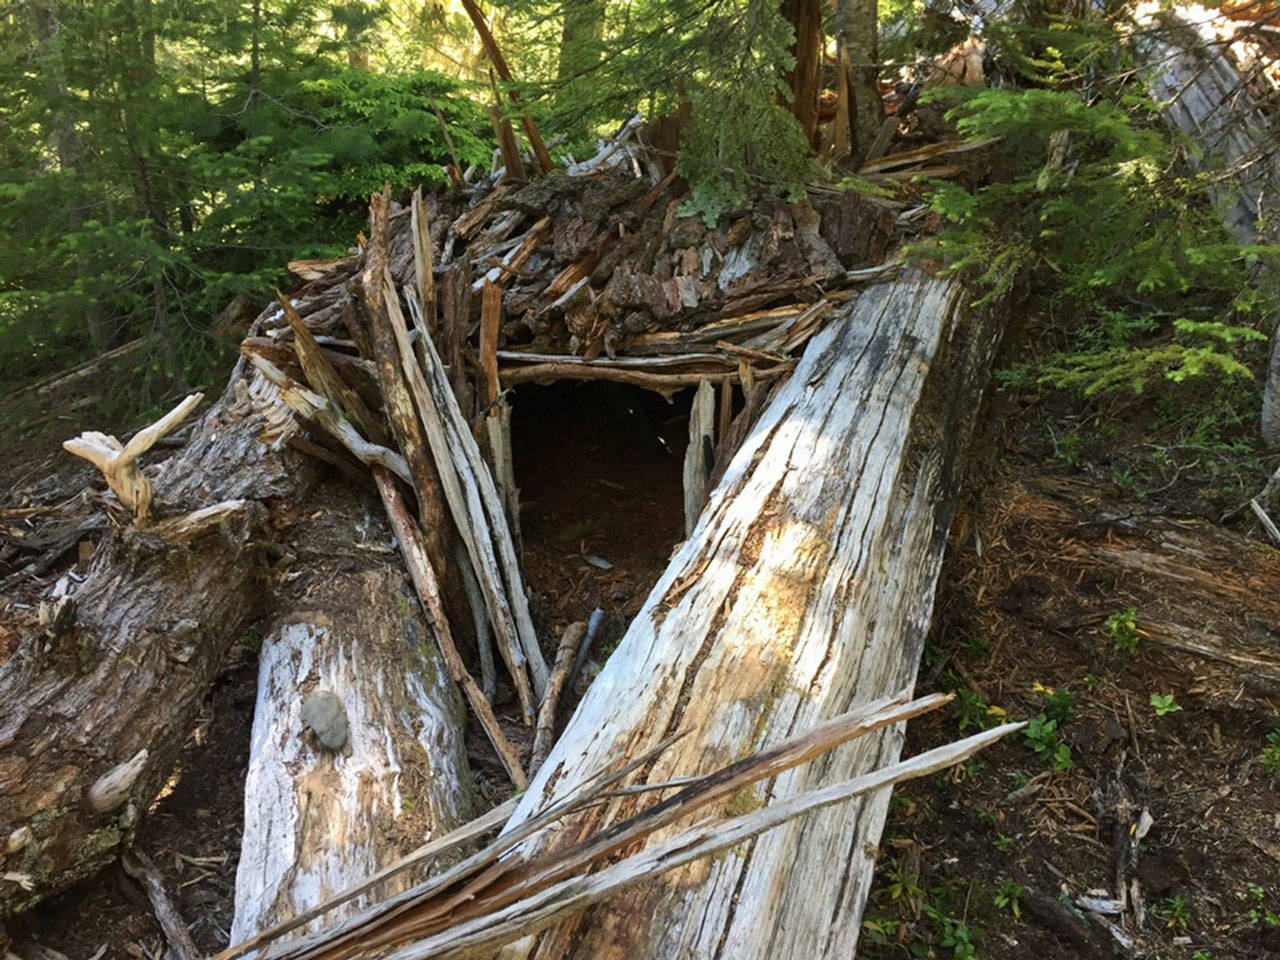 Sajean Geer of Port Angeles, 71, built this shelter while surviving six days with only her dog in the Olympic National Park wilderness.